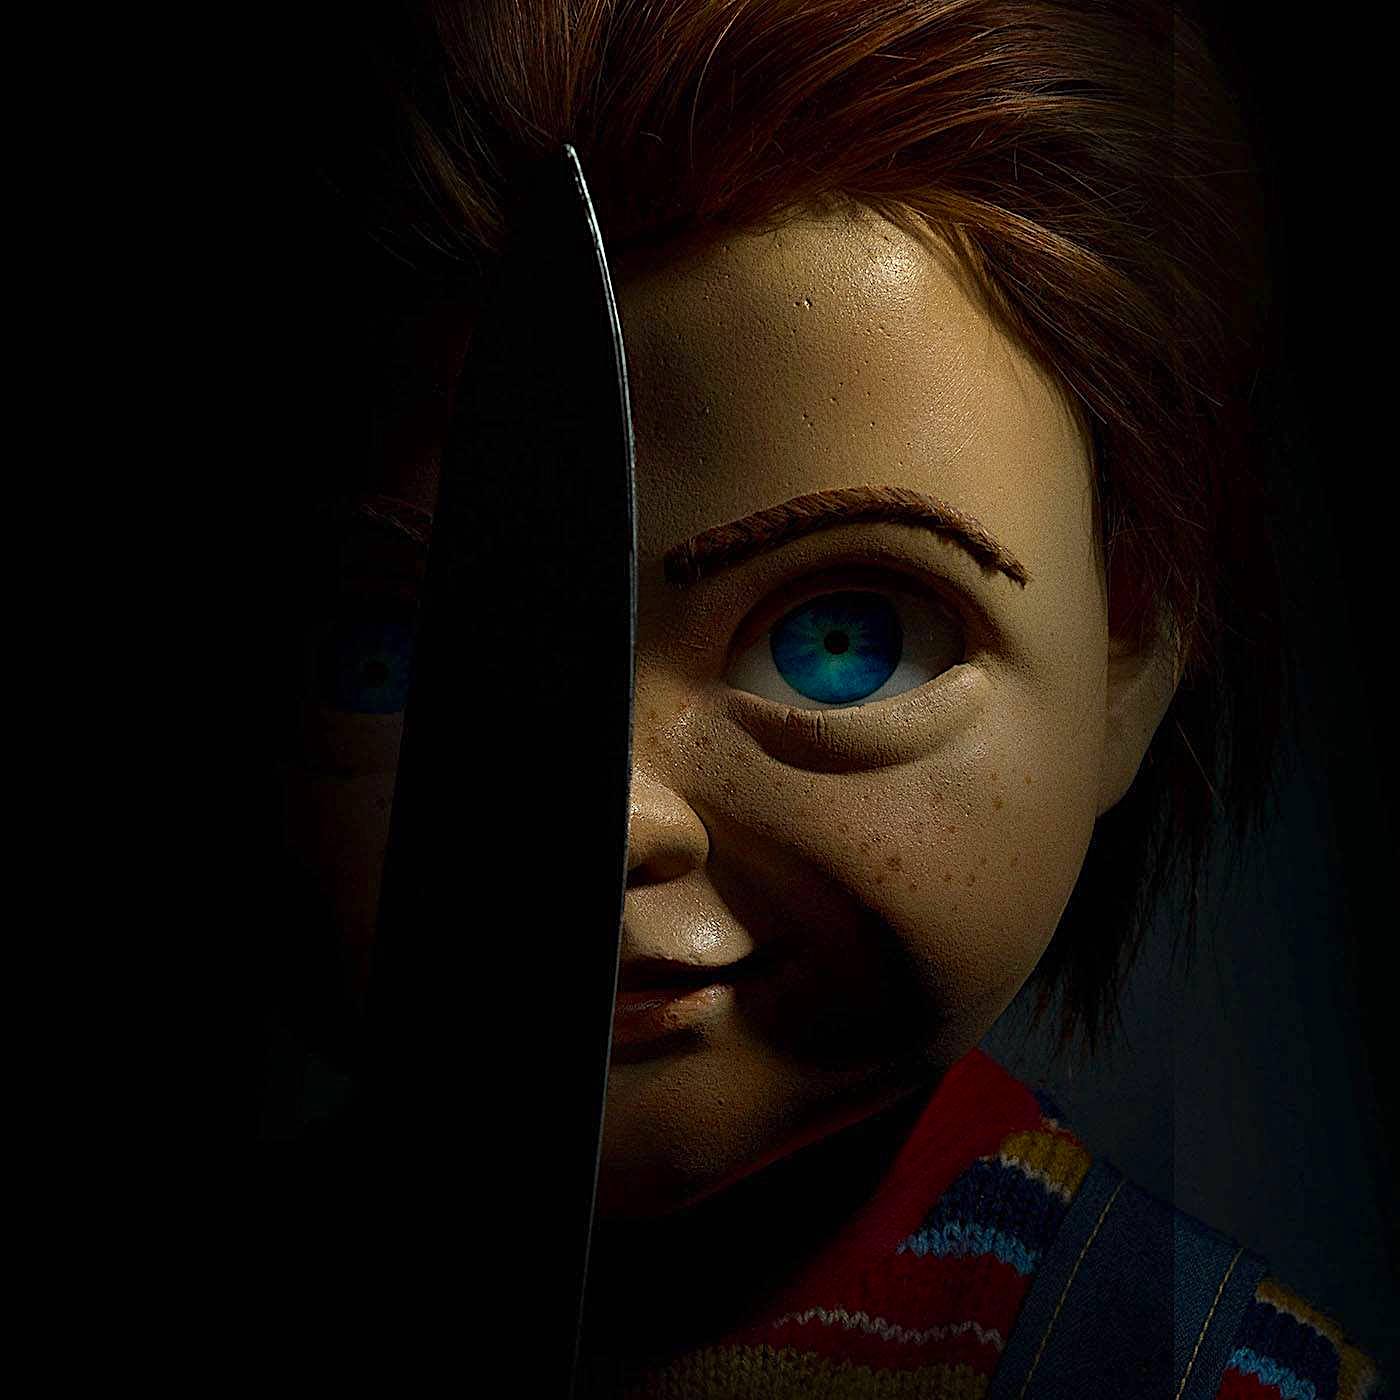 Orion Pictures' Official "Child's Play" Trailer with The Hit House composer Scott Lee Miller's custom remix contribution.